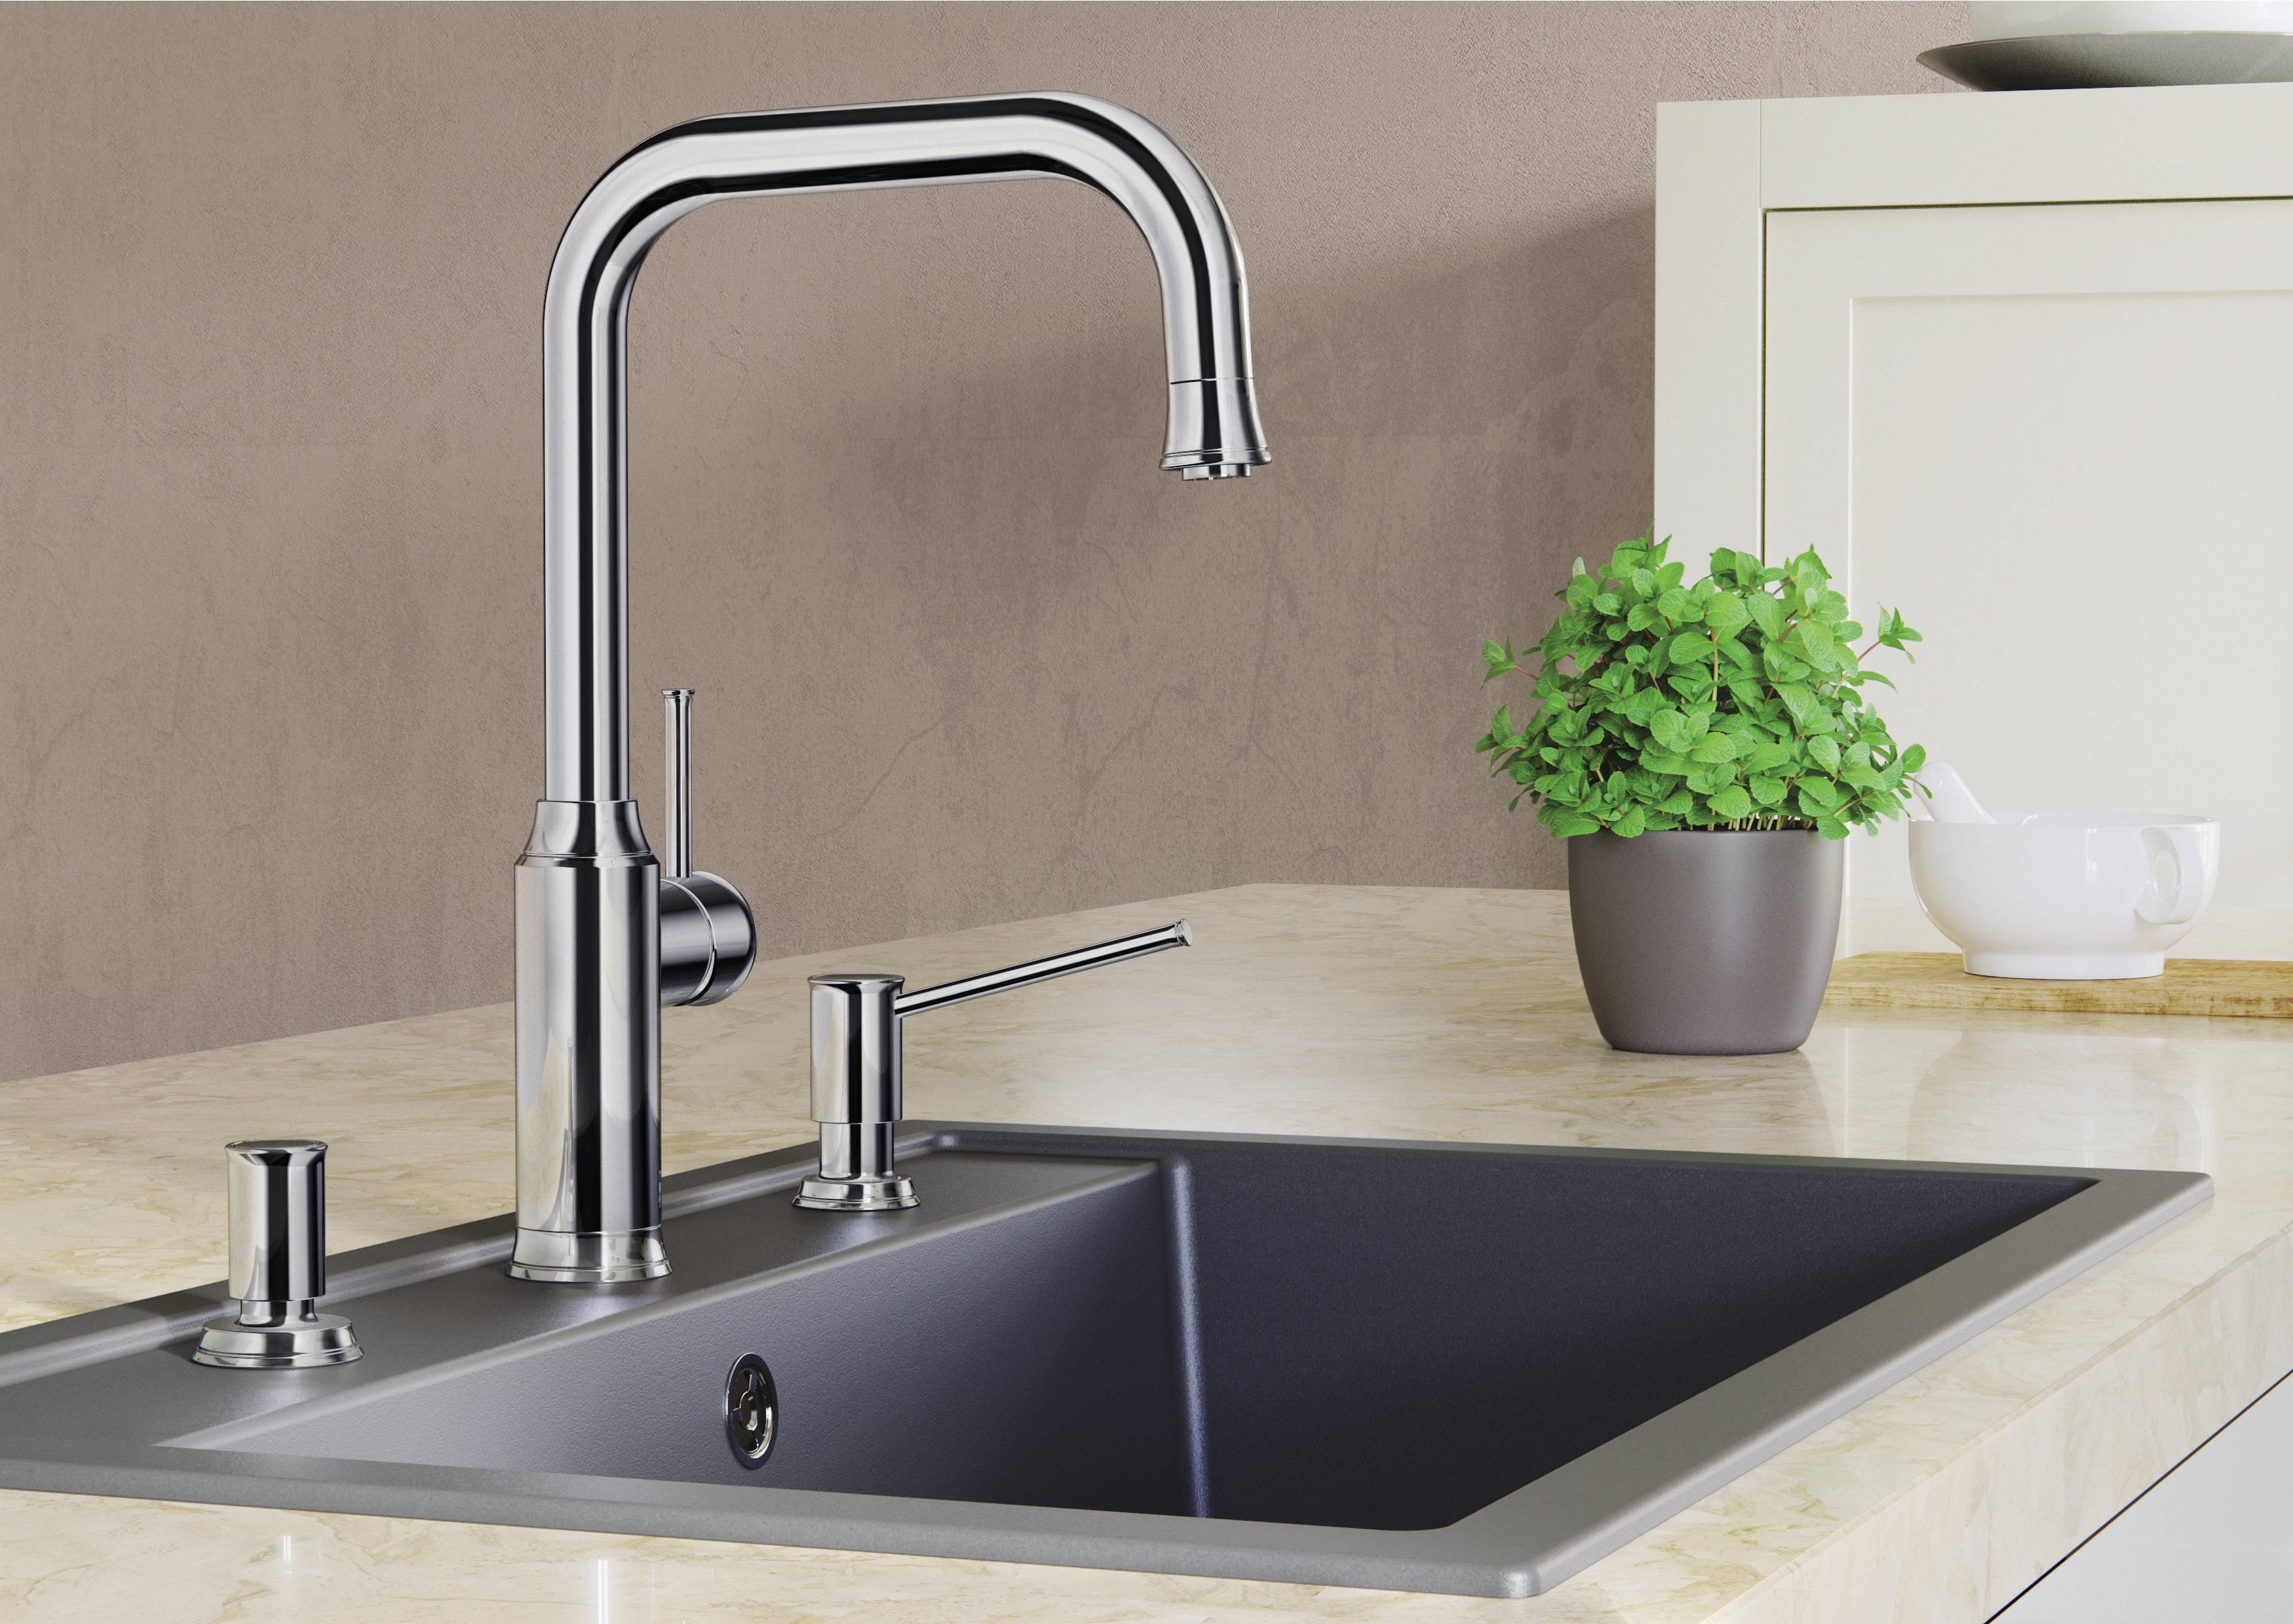 This high-spouted kitchen mixer tap features an impressive pull-out spray